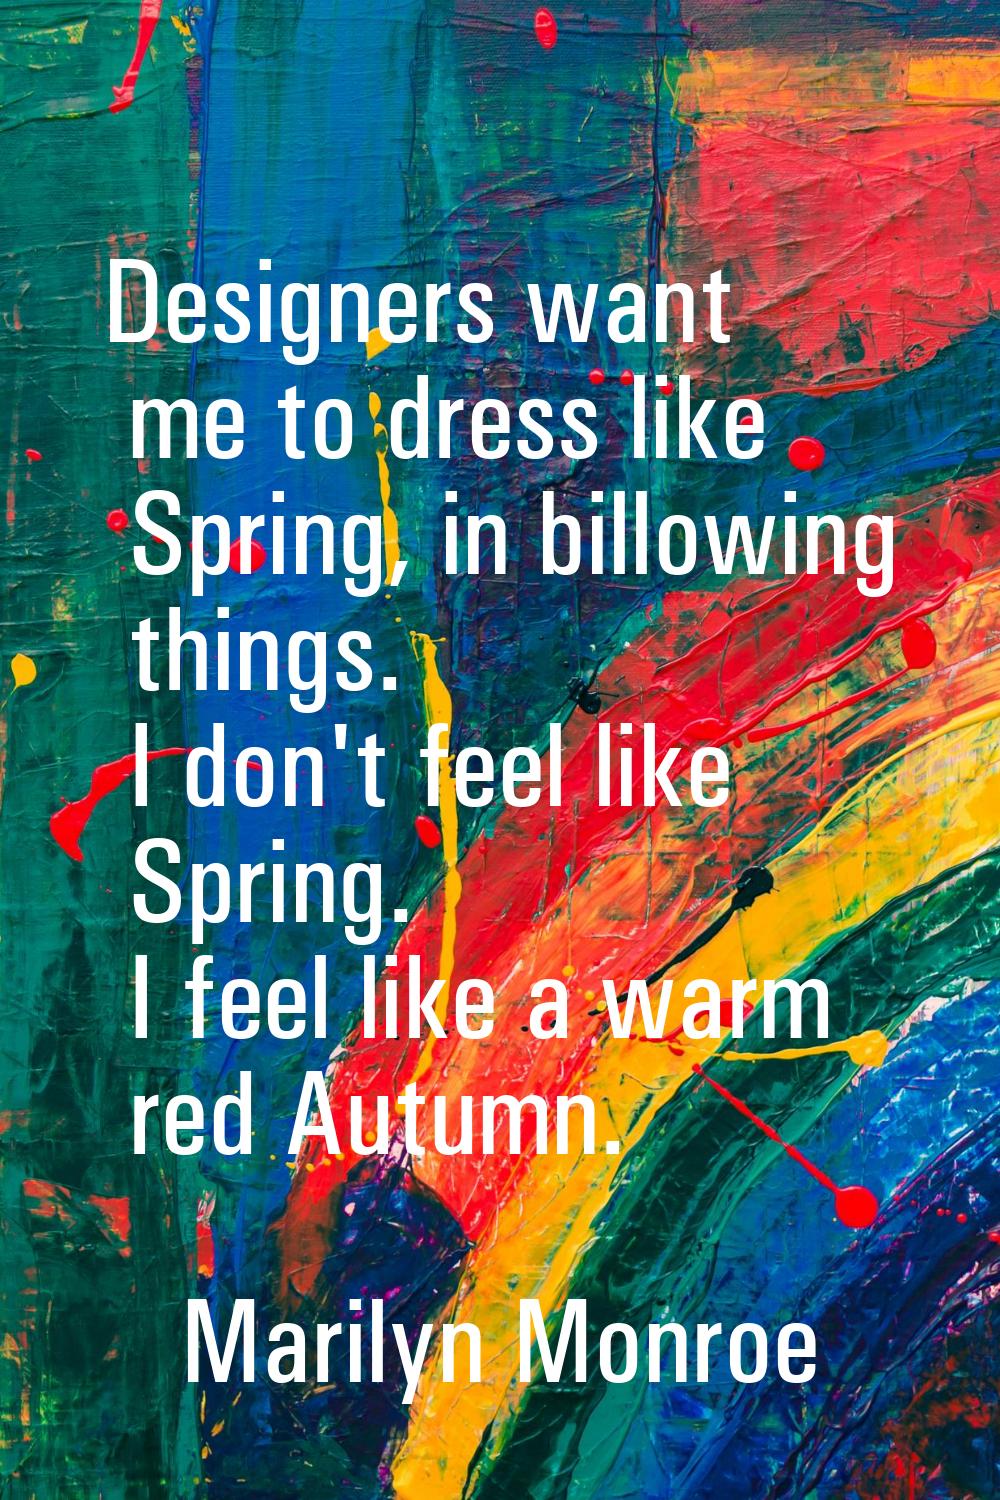 Designers want me to dress like Spring, in billowing things. I don't feel like Spring. I feel like 